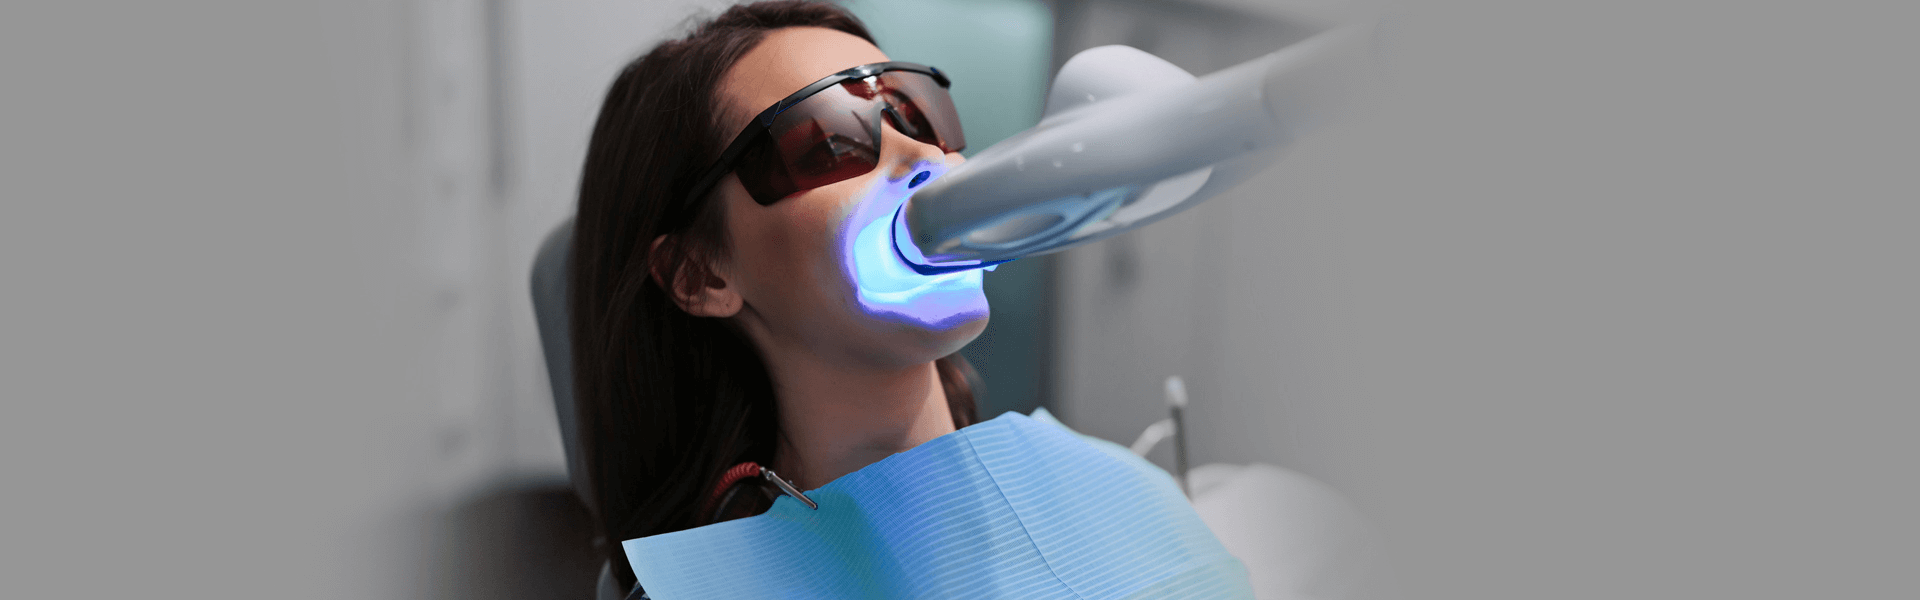 Laser Dentistry now Conveniently Located in Salt Lake City